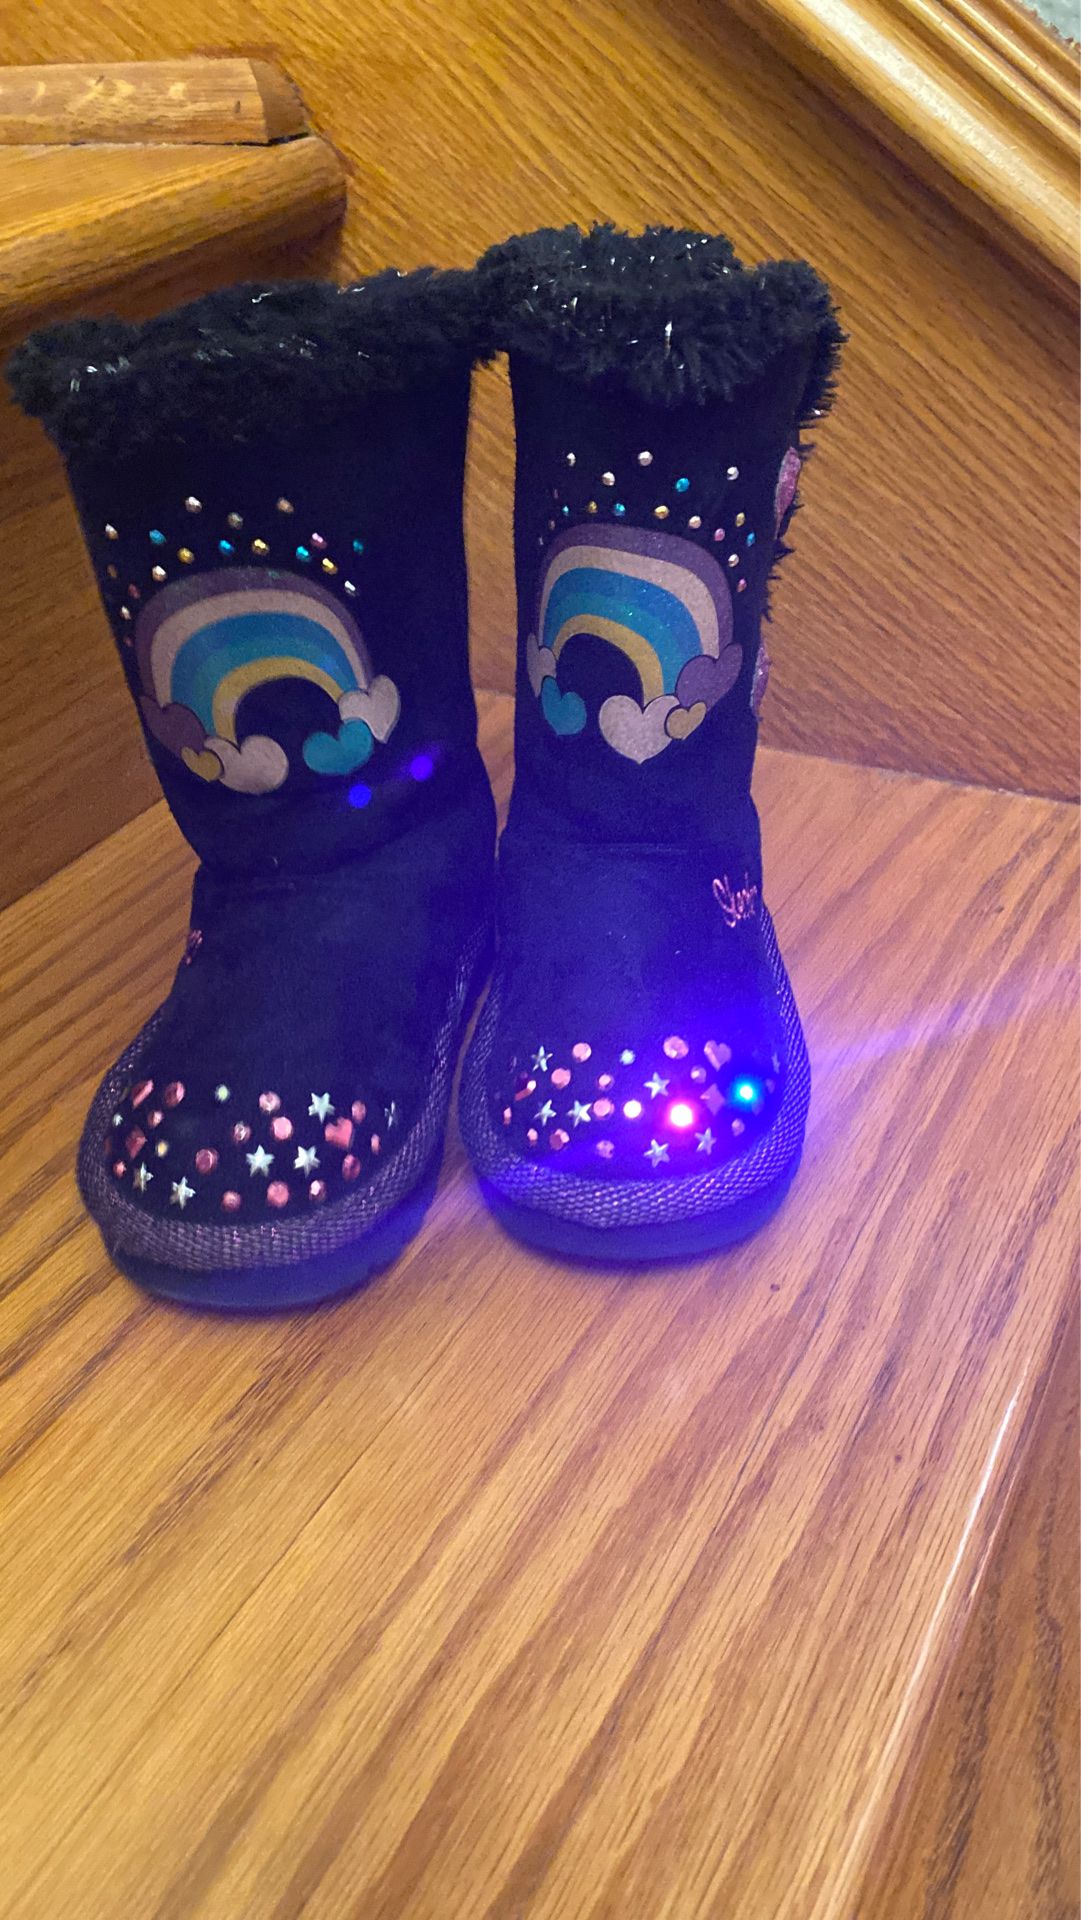 Skechers boots that light up